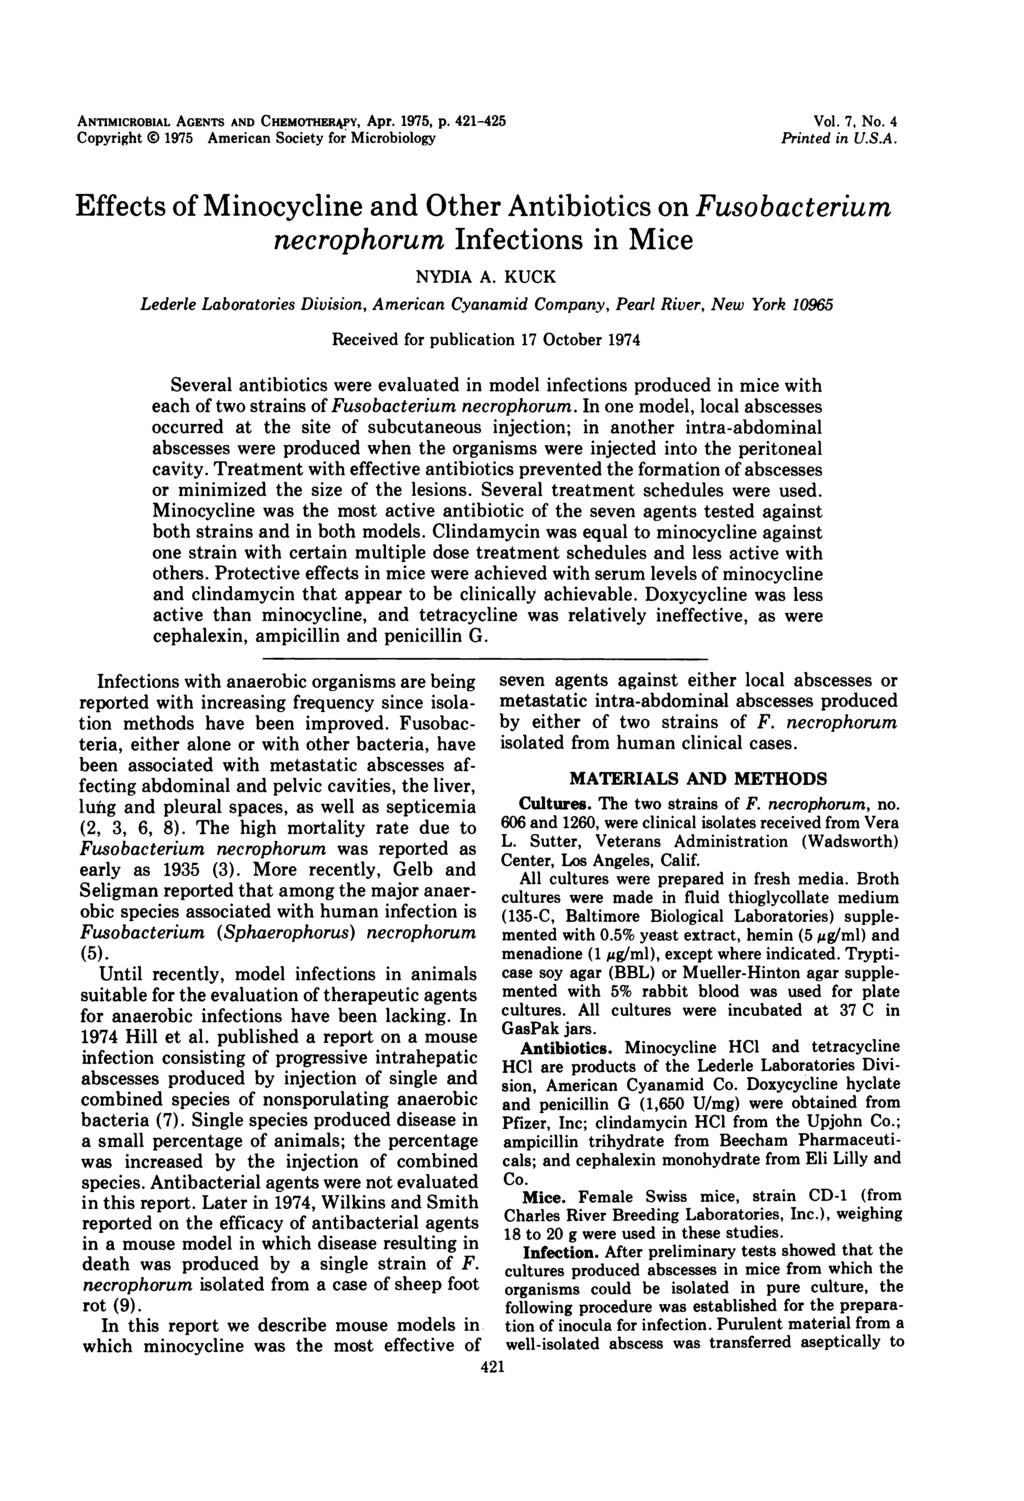 ANTIMICROBIAL AGENTS AND CHEMOTHERAPY, Apr. 1975, p. 421-425 Copyright 0 1975 American Society for Microbiology Vol. 7, No. 4 Printed in U.S.A. Effects of Minocycline and Other s on Fusobacterium necrophorum Infections in Mice NYDIA A.